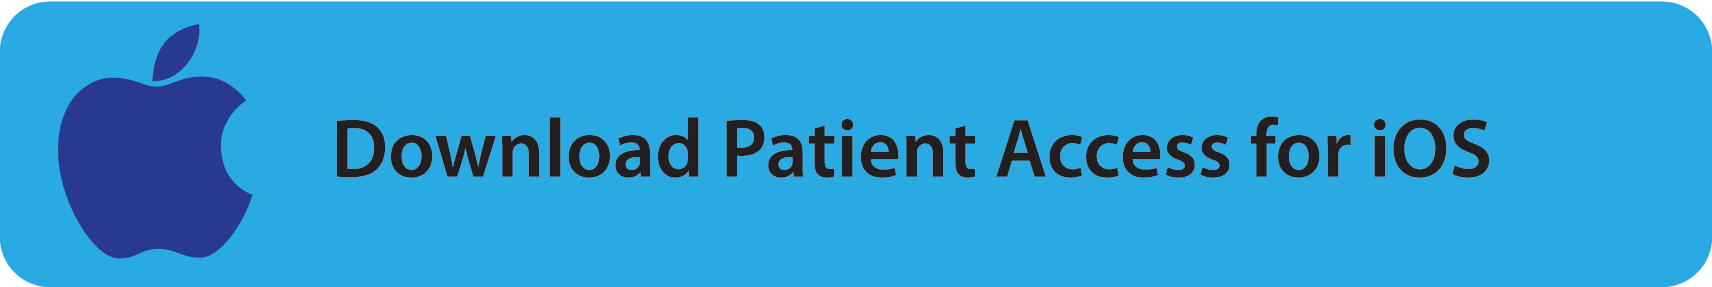 Download patient access for iOS